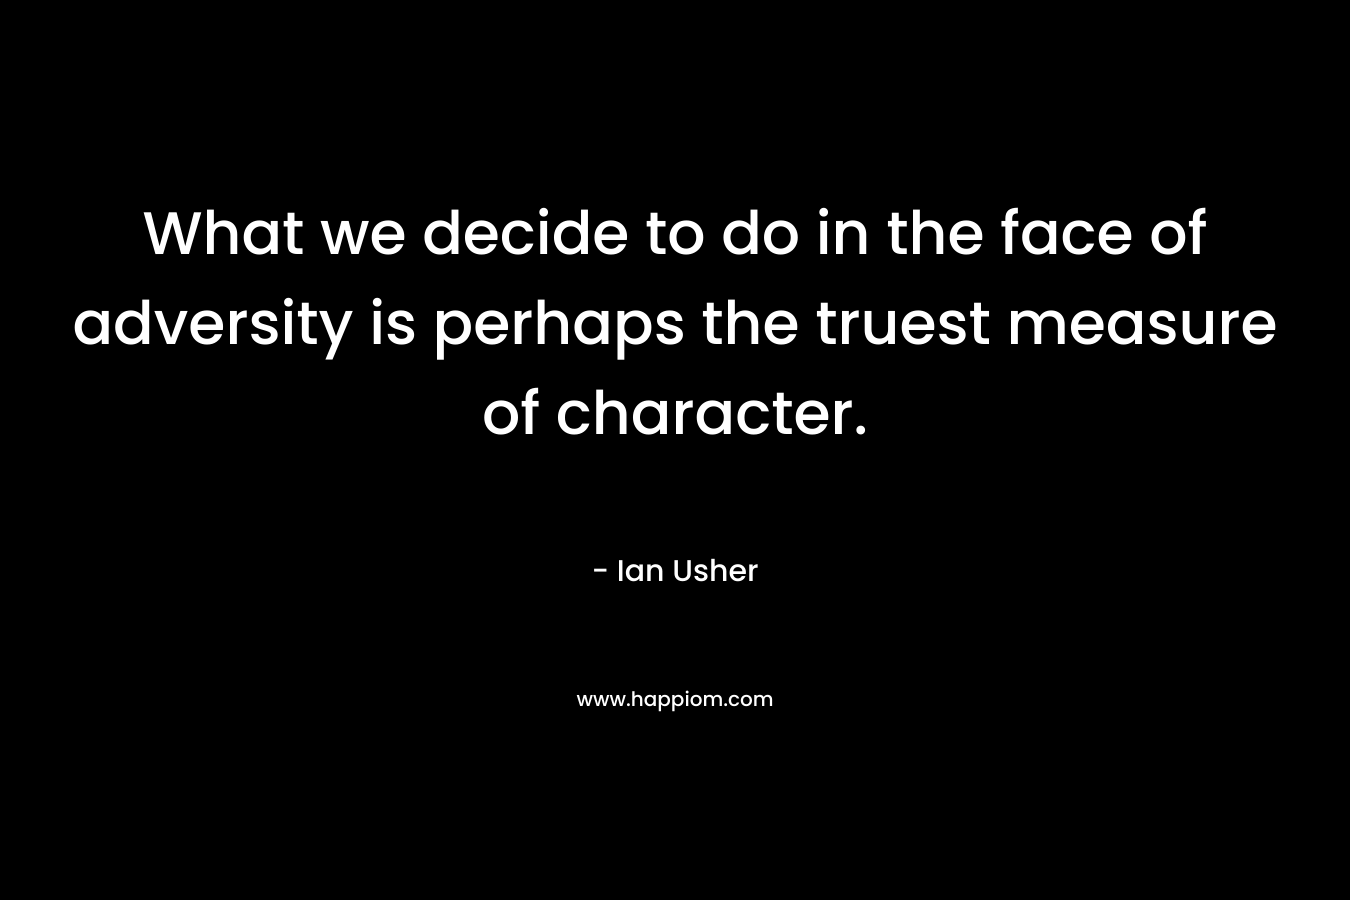 What we decide to do in the face of adversity is perhaps the truest measure of character.